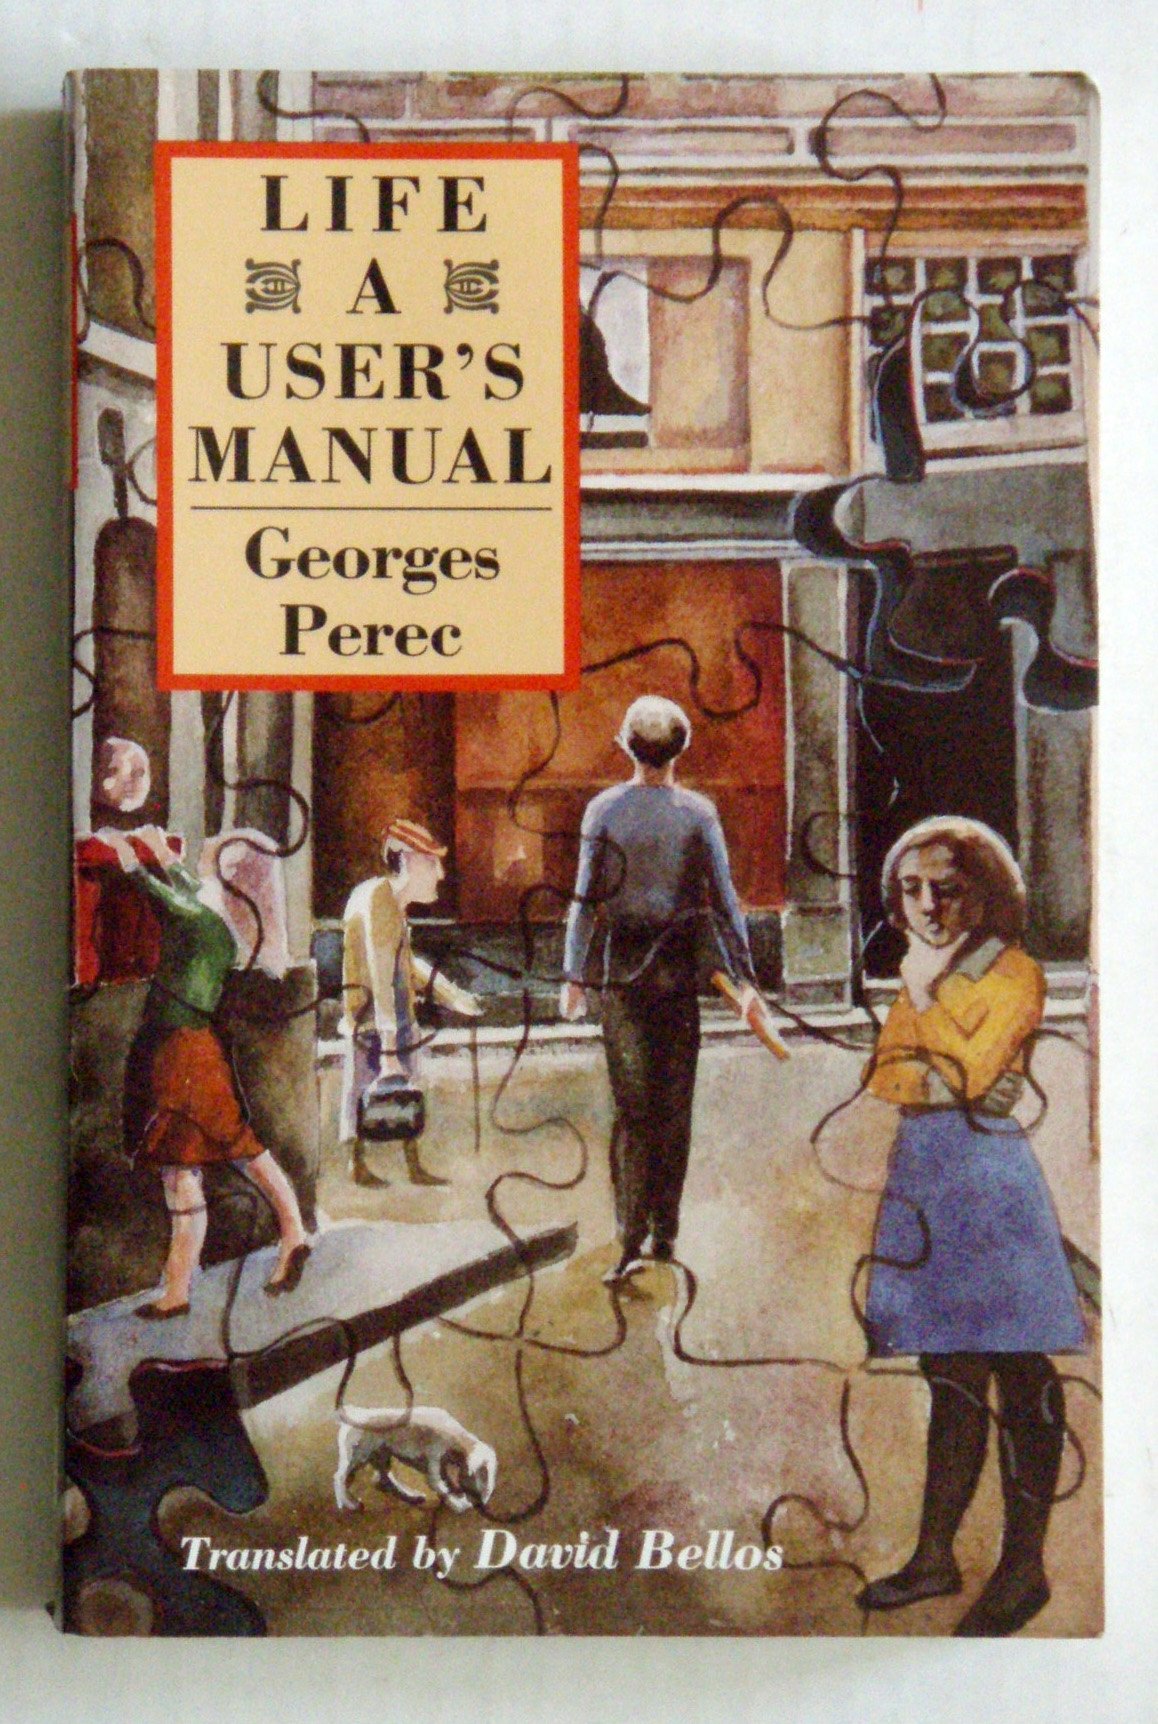 Life+a+User%E2%80%99s+Manual+by+Georges+Perec+%281978%2C+Tr.+1987%29Life+a+User%E2%80%99s+Manual+by+Georges+Perec+%281978%2C+Tr - Life a User’s Manual - Georges Perec (1978, Tr. 1987)